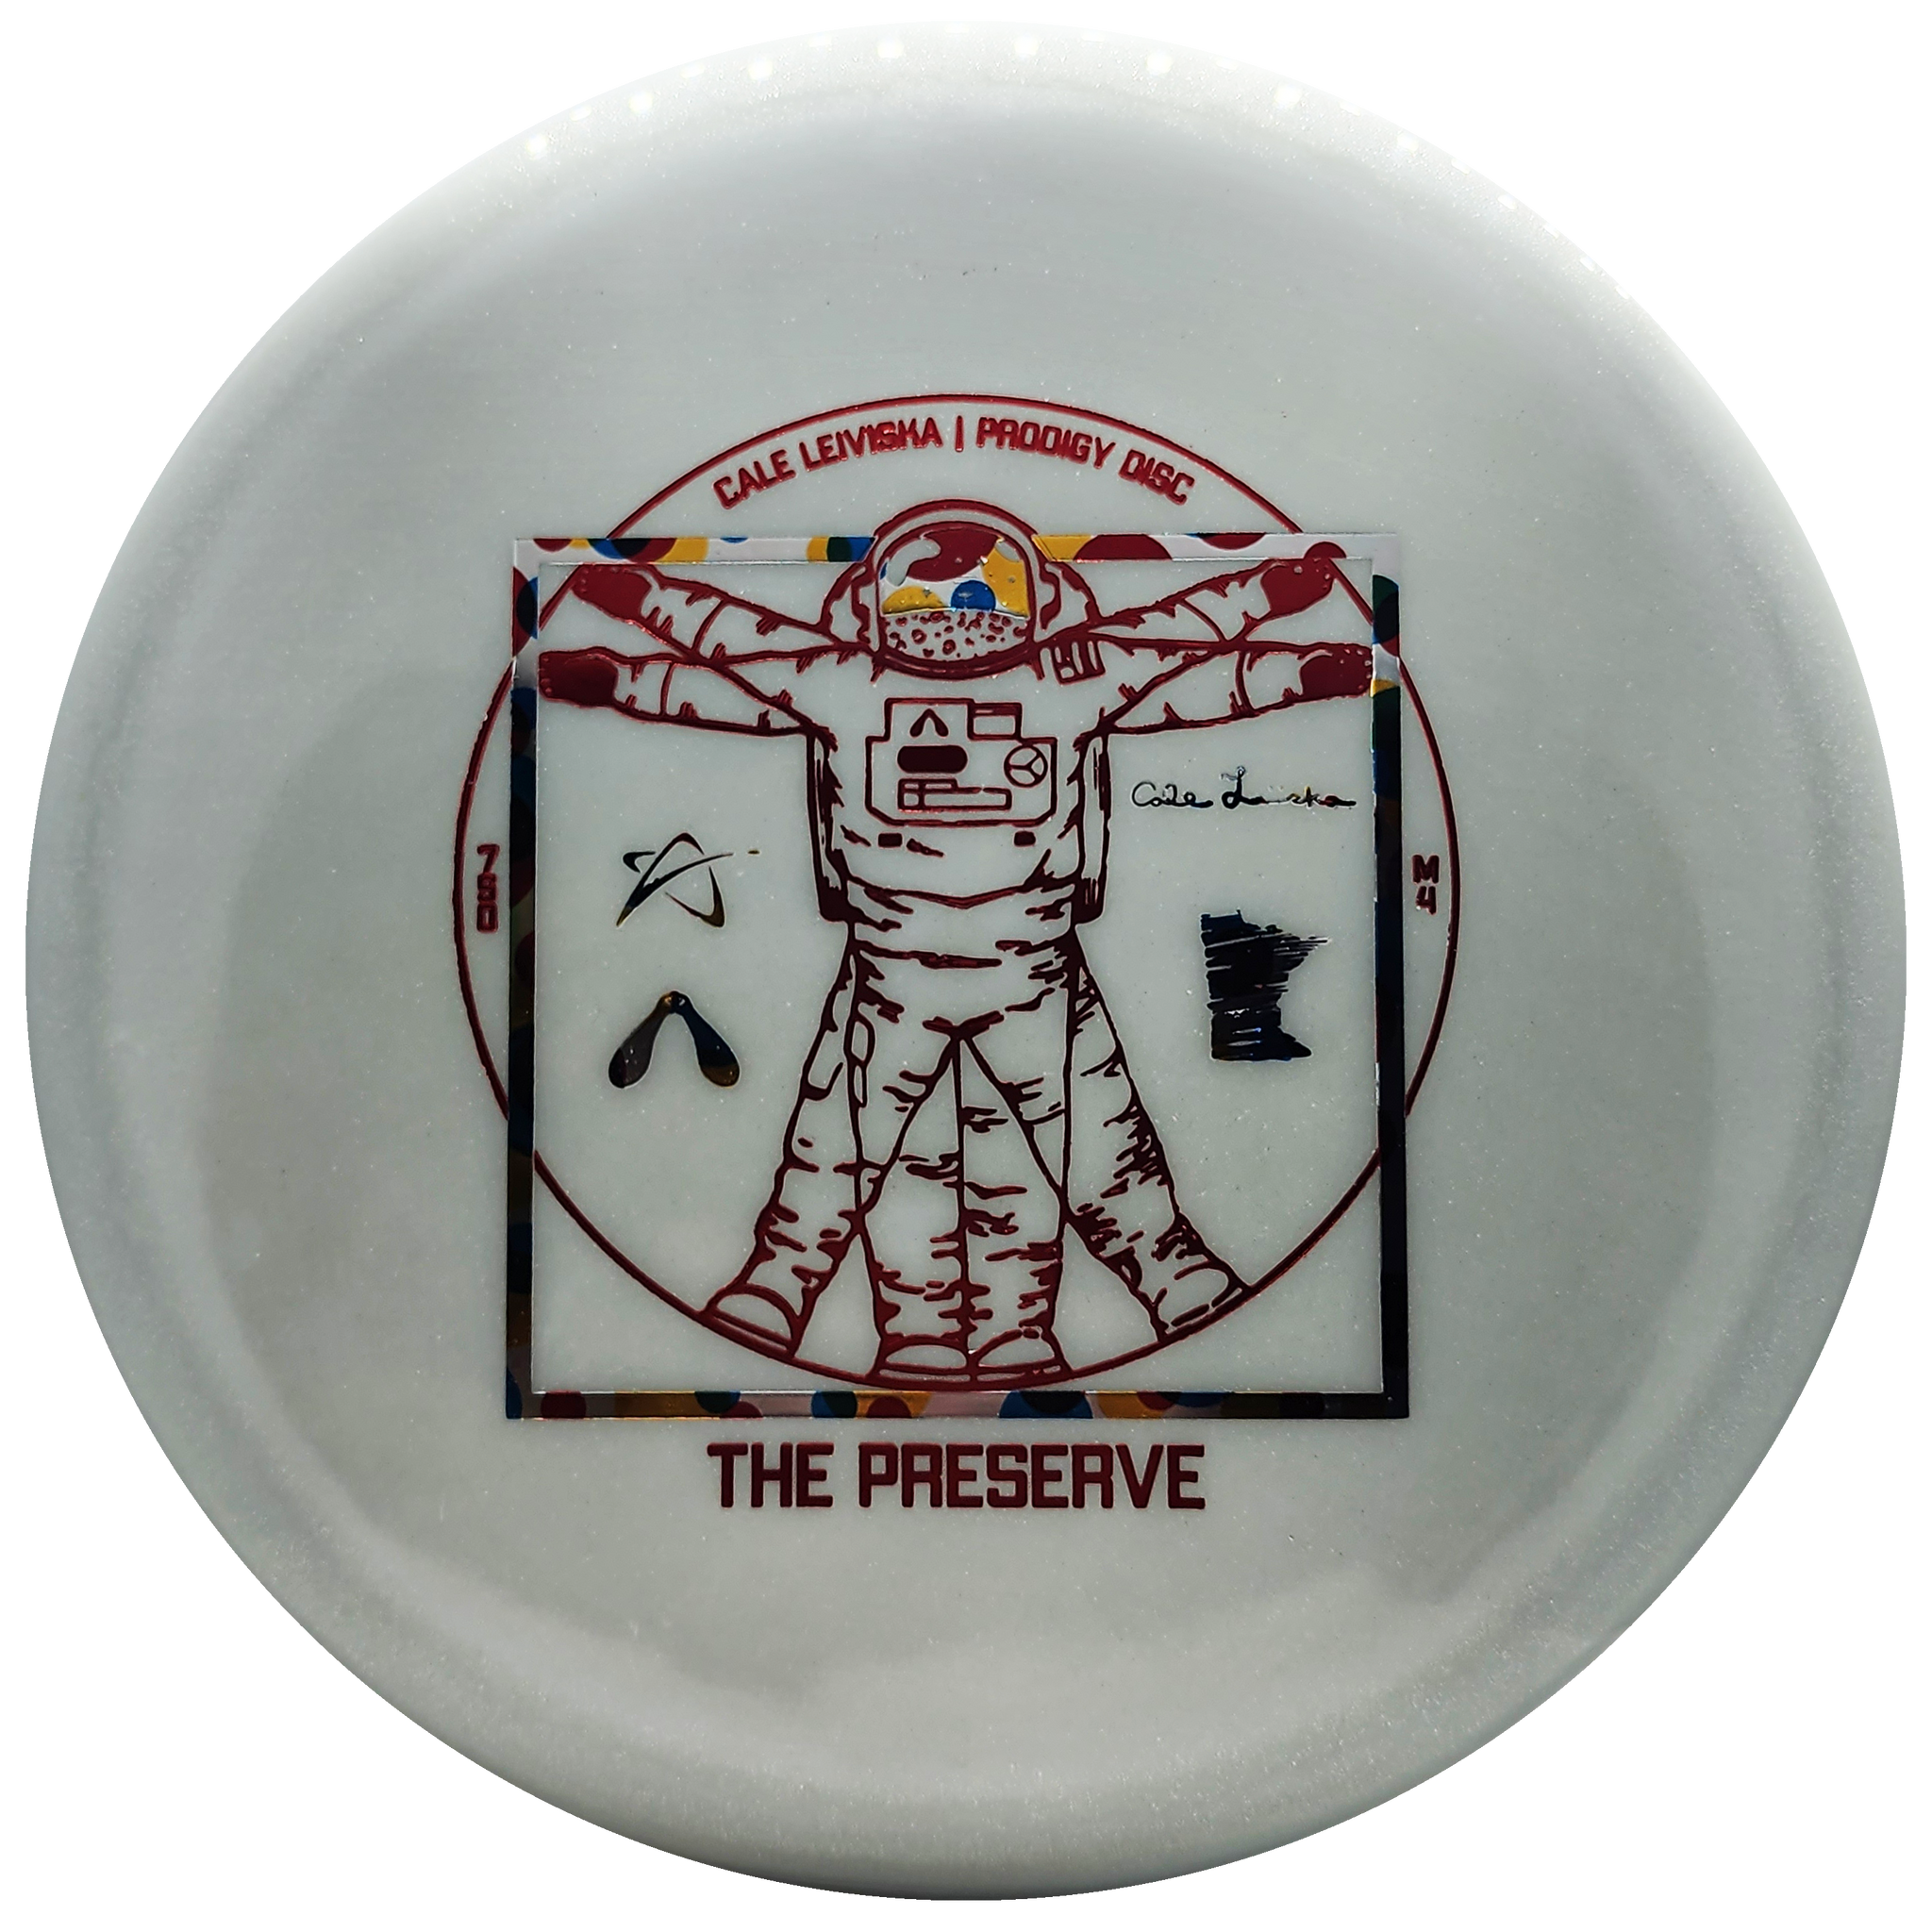 Prodigy: M4 750 Glimmer GLOW - Cale Leiviska "The Preserve Spaceman" Stamp - Grey/Dots/Red